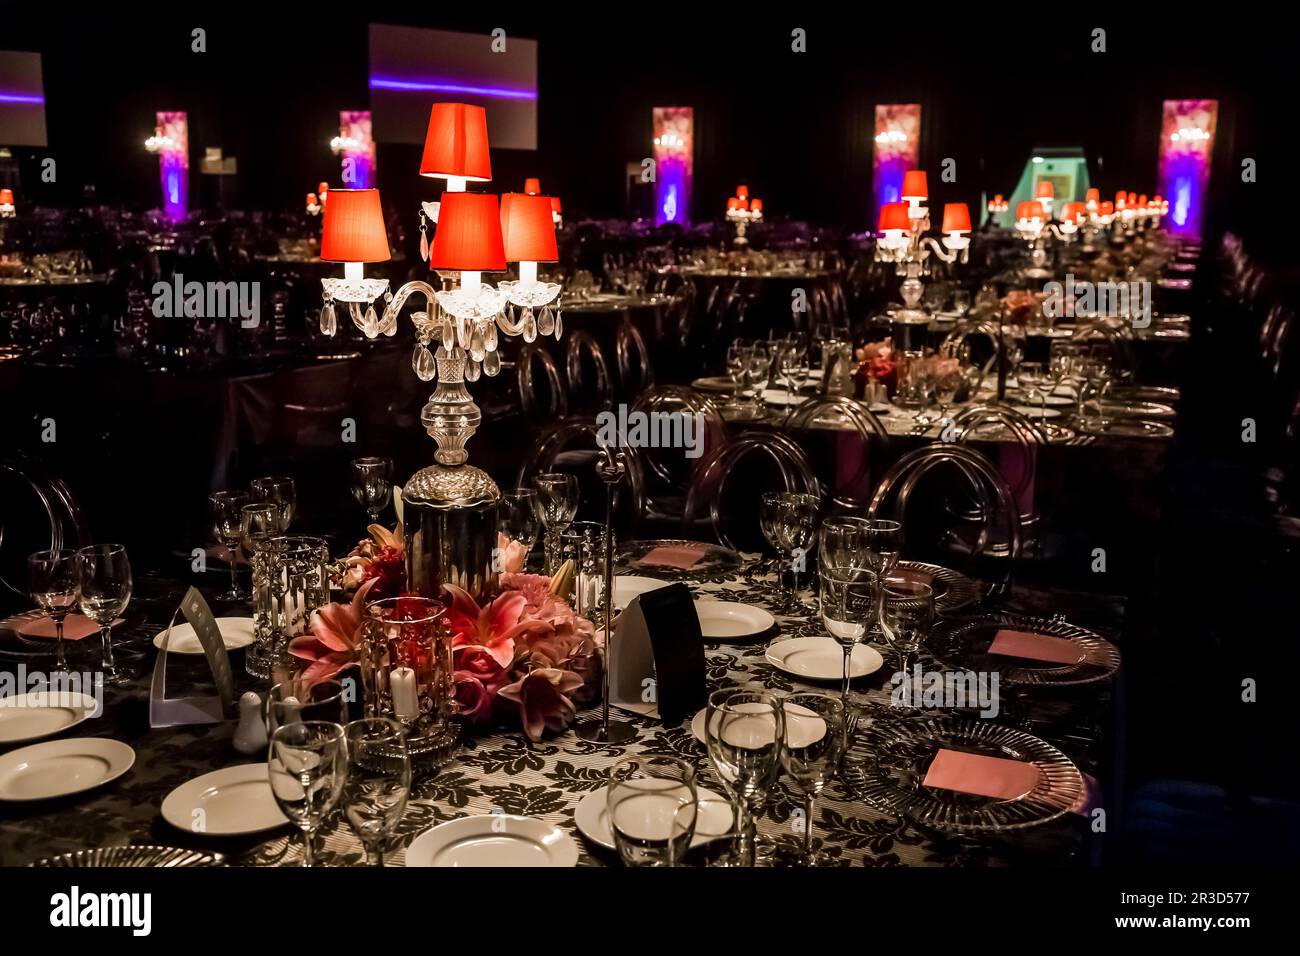 Decor with candles, flowers and lamps for a large corporate party event or Gala Dinner Stock Photo